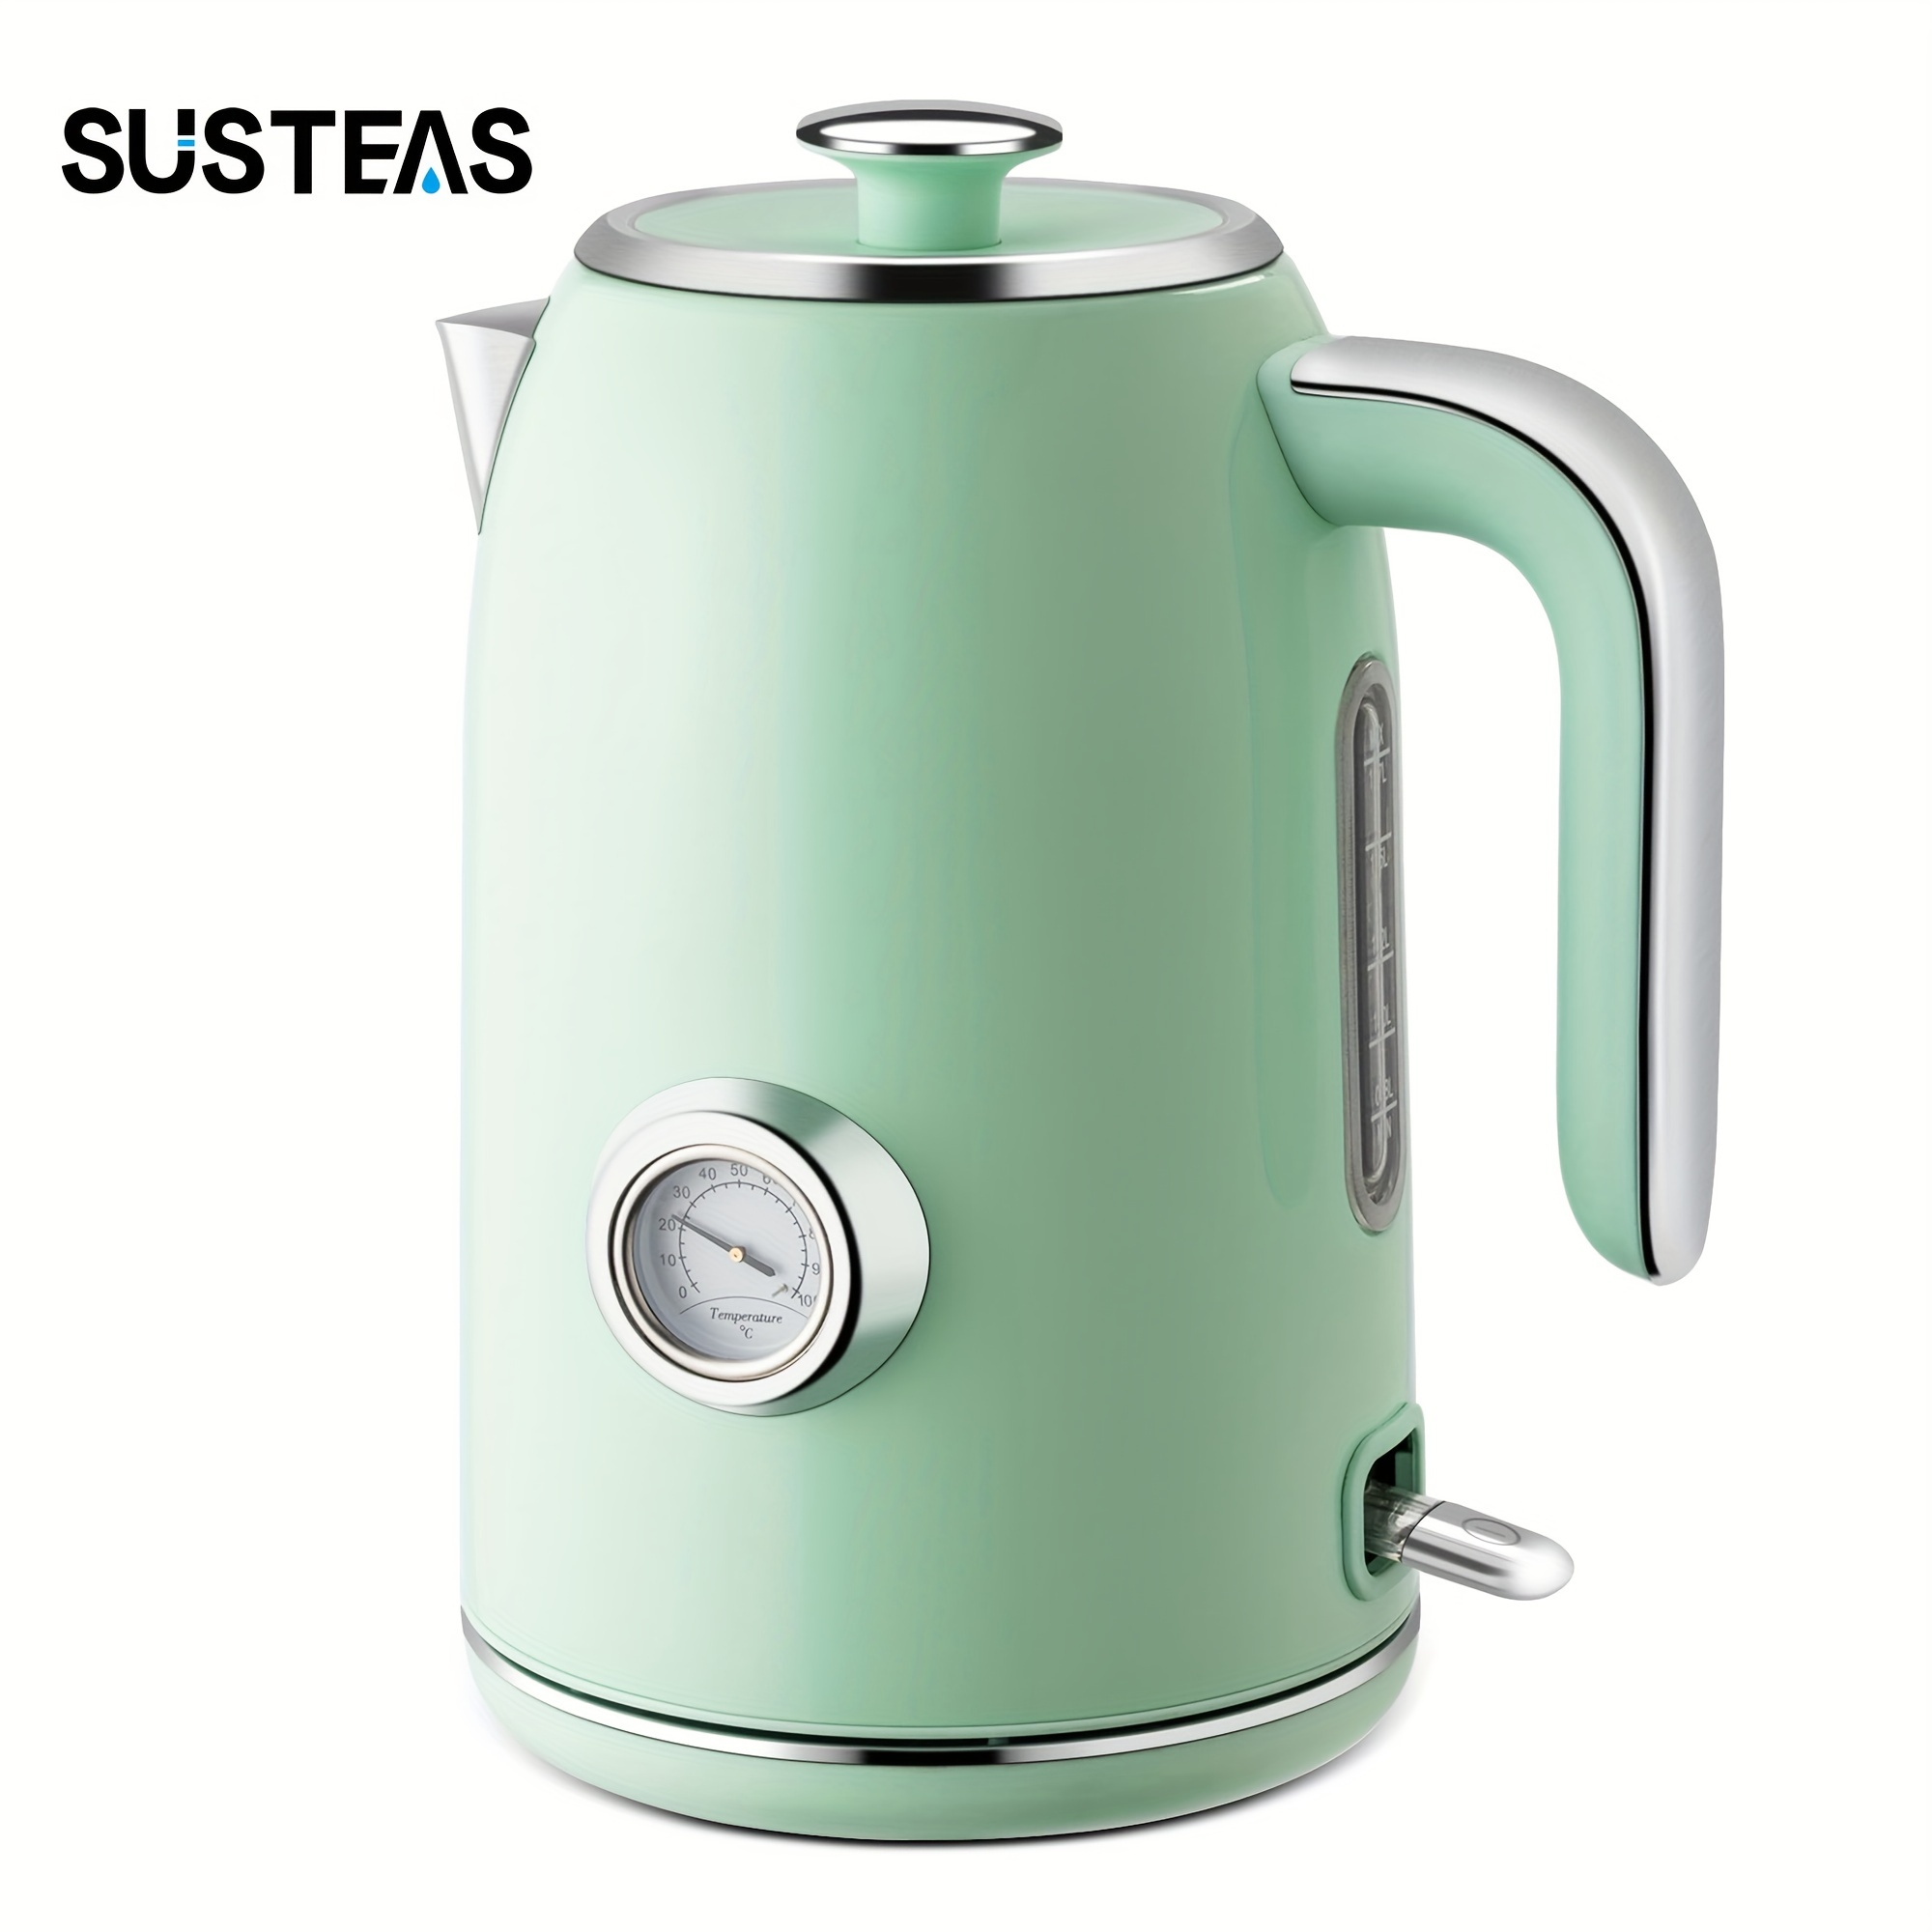 

Susteas Electric Kettle, 1.7l Stainless Steel Tea Kettle With Temperature Gauge, 1500w Water Boiler With Led Light, Bpa-free, Auto Shut-off And Boil-dry Protection - Mint Green